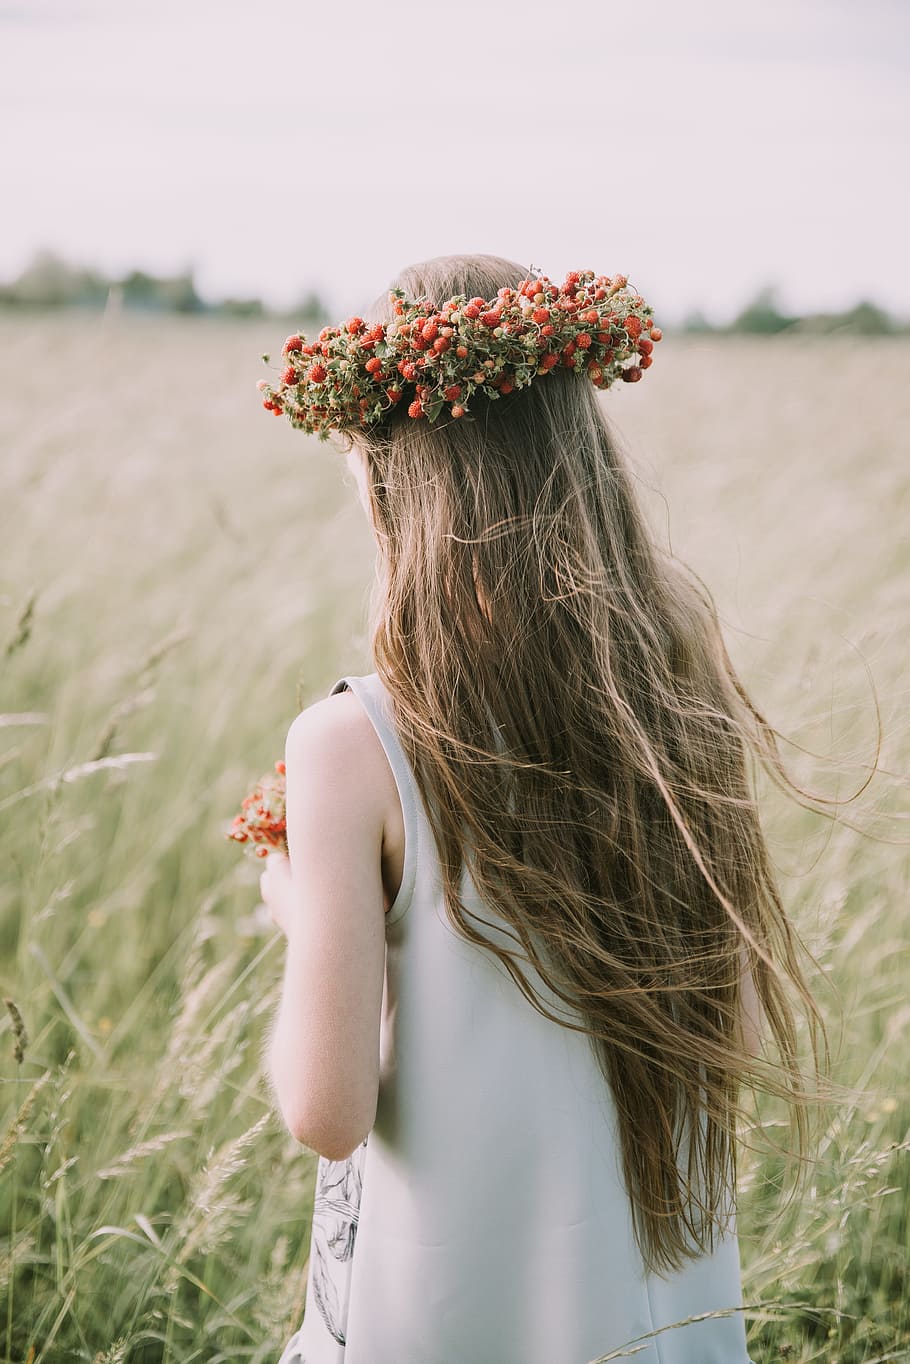 HD wallpaper: woman holding red flowers, field, crown, lady, nature,  outdoors | Wallpaper Flare